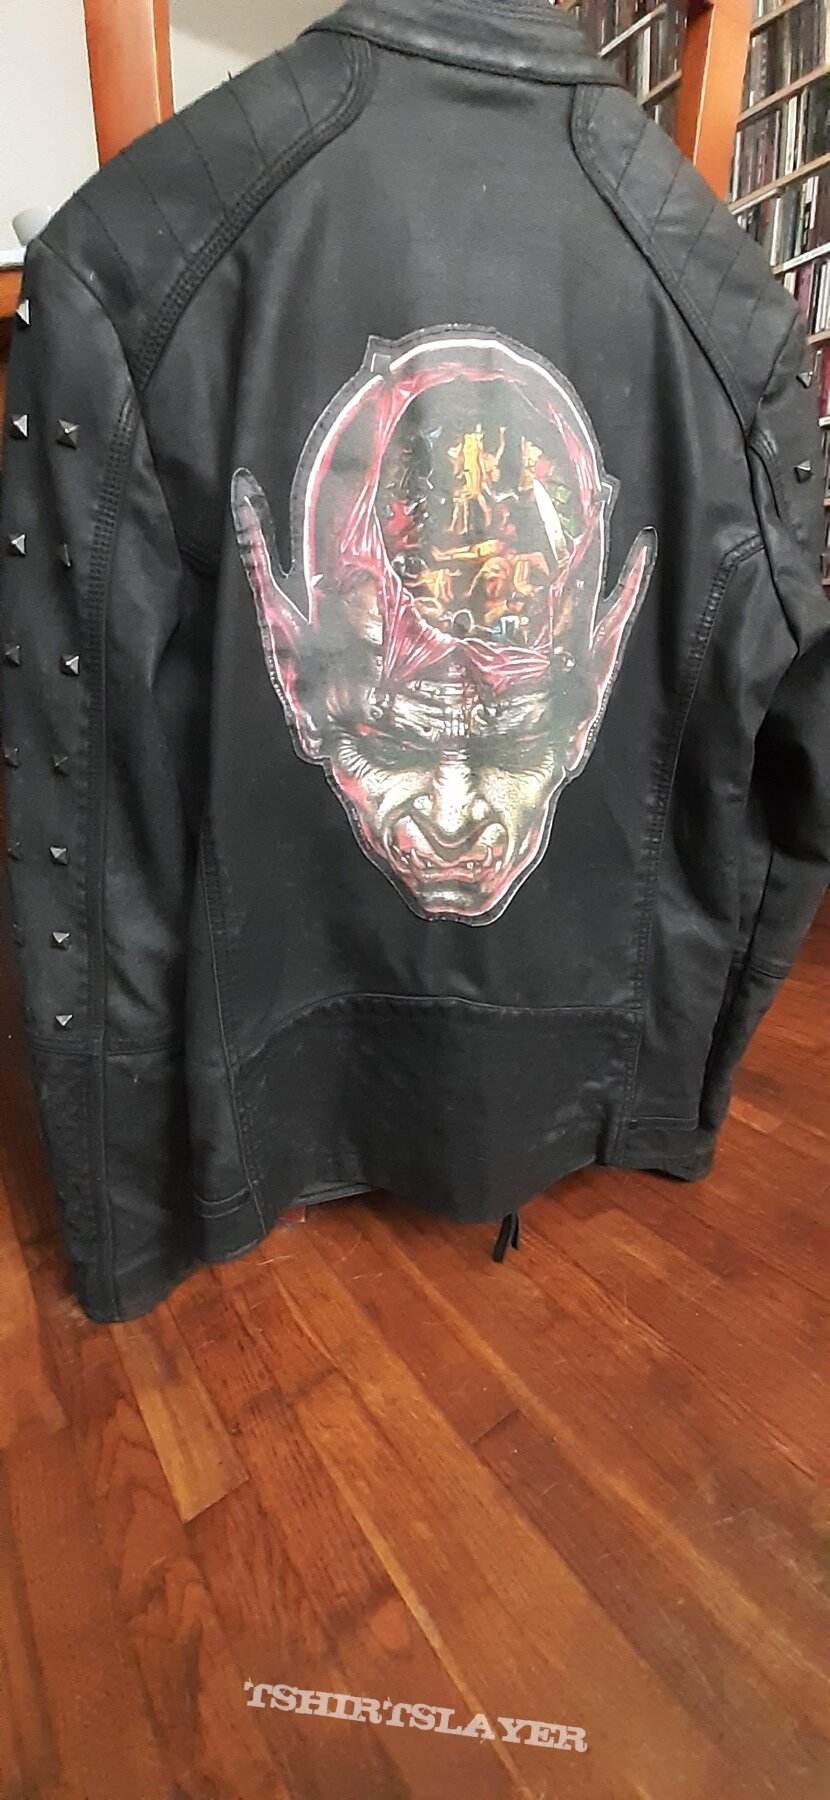 Leather Jacket with Kreator Backpatch